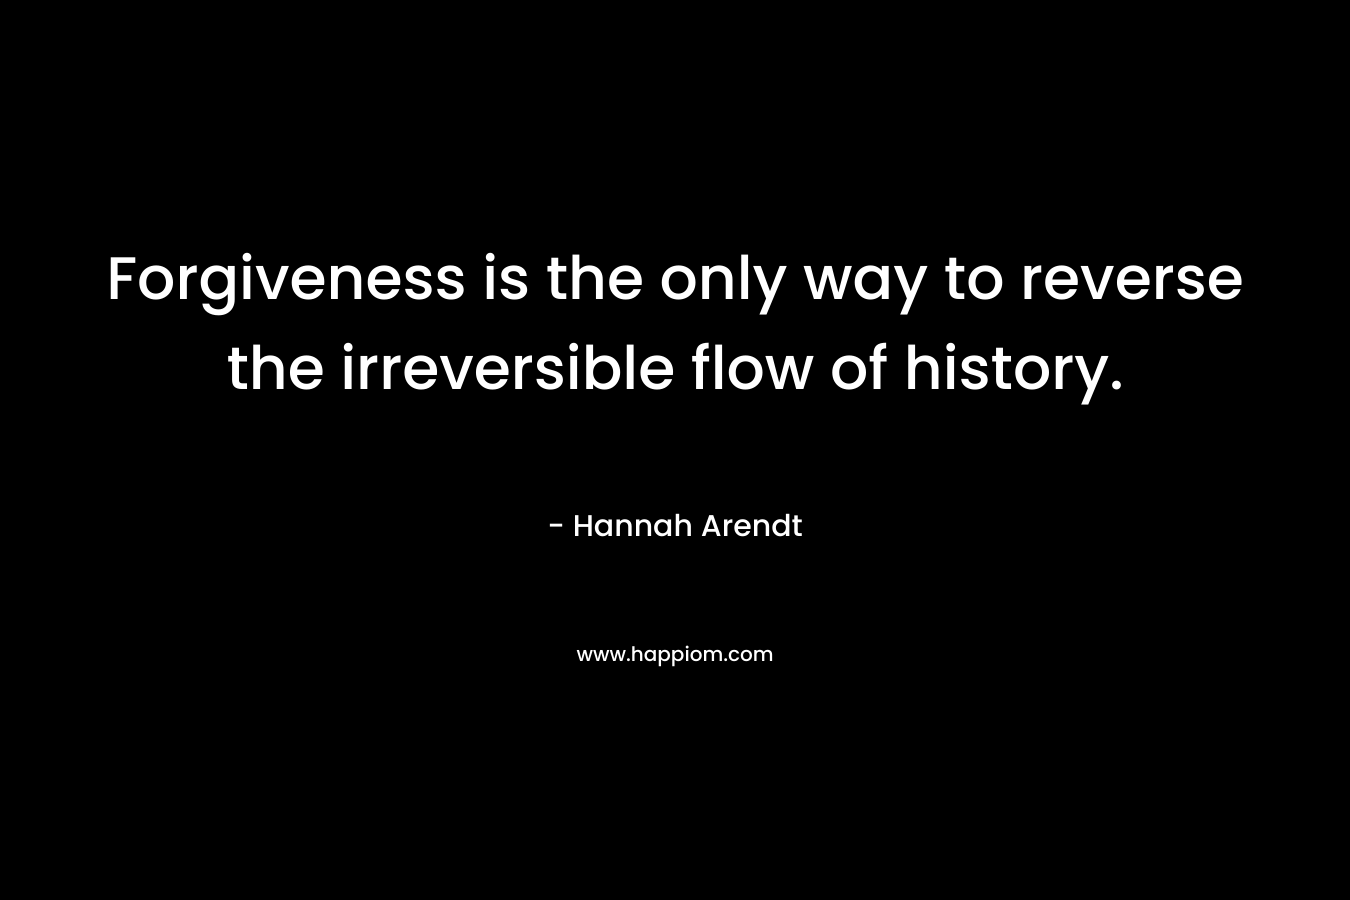 Forgiveness is the only way to reverse the irreversible flow of history. – Hannah Arendt